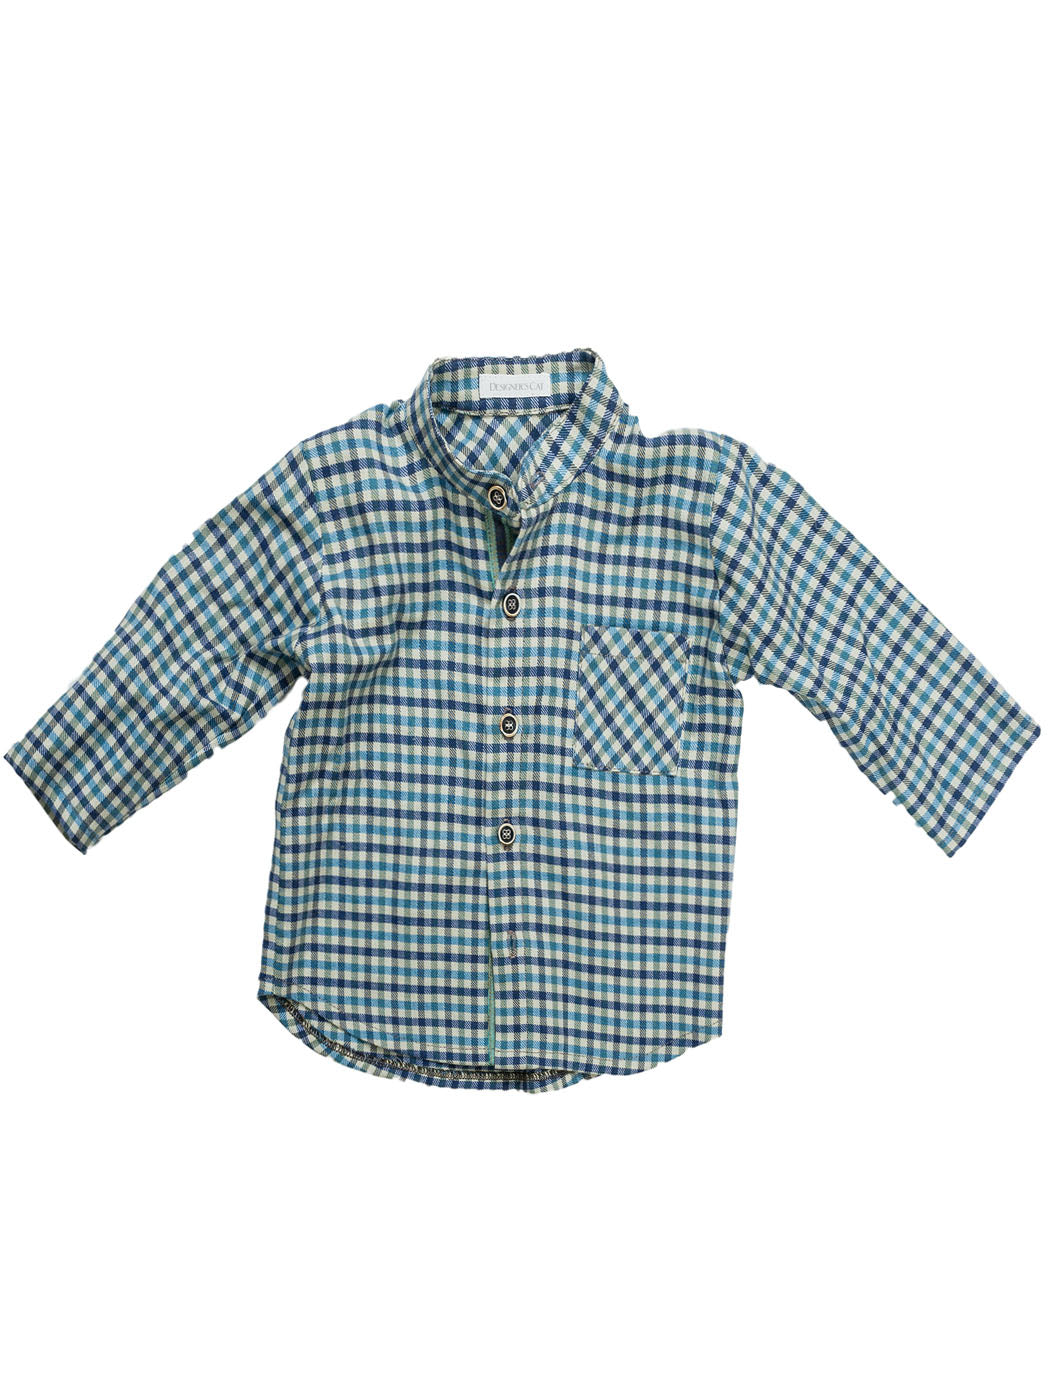 TOMMY Baby plaid shirt-50% off